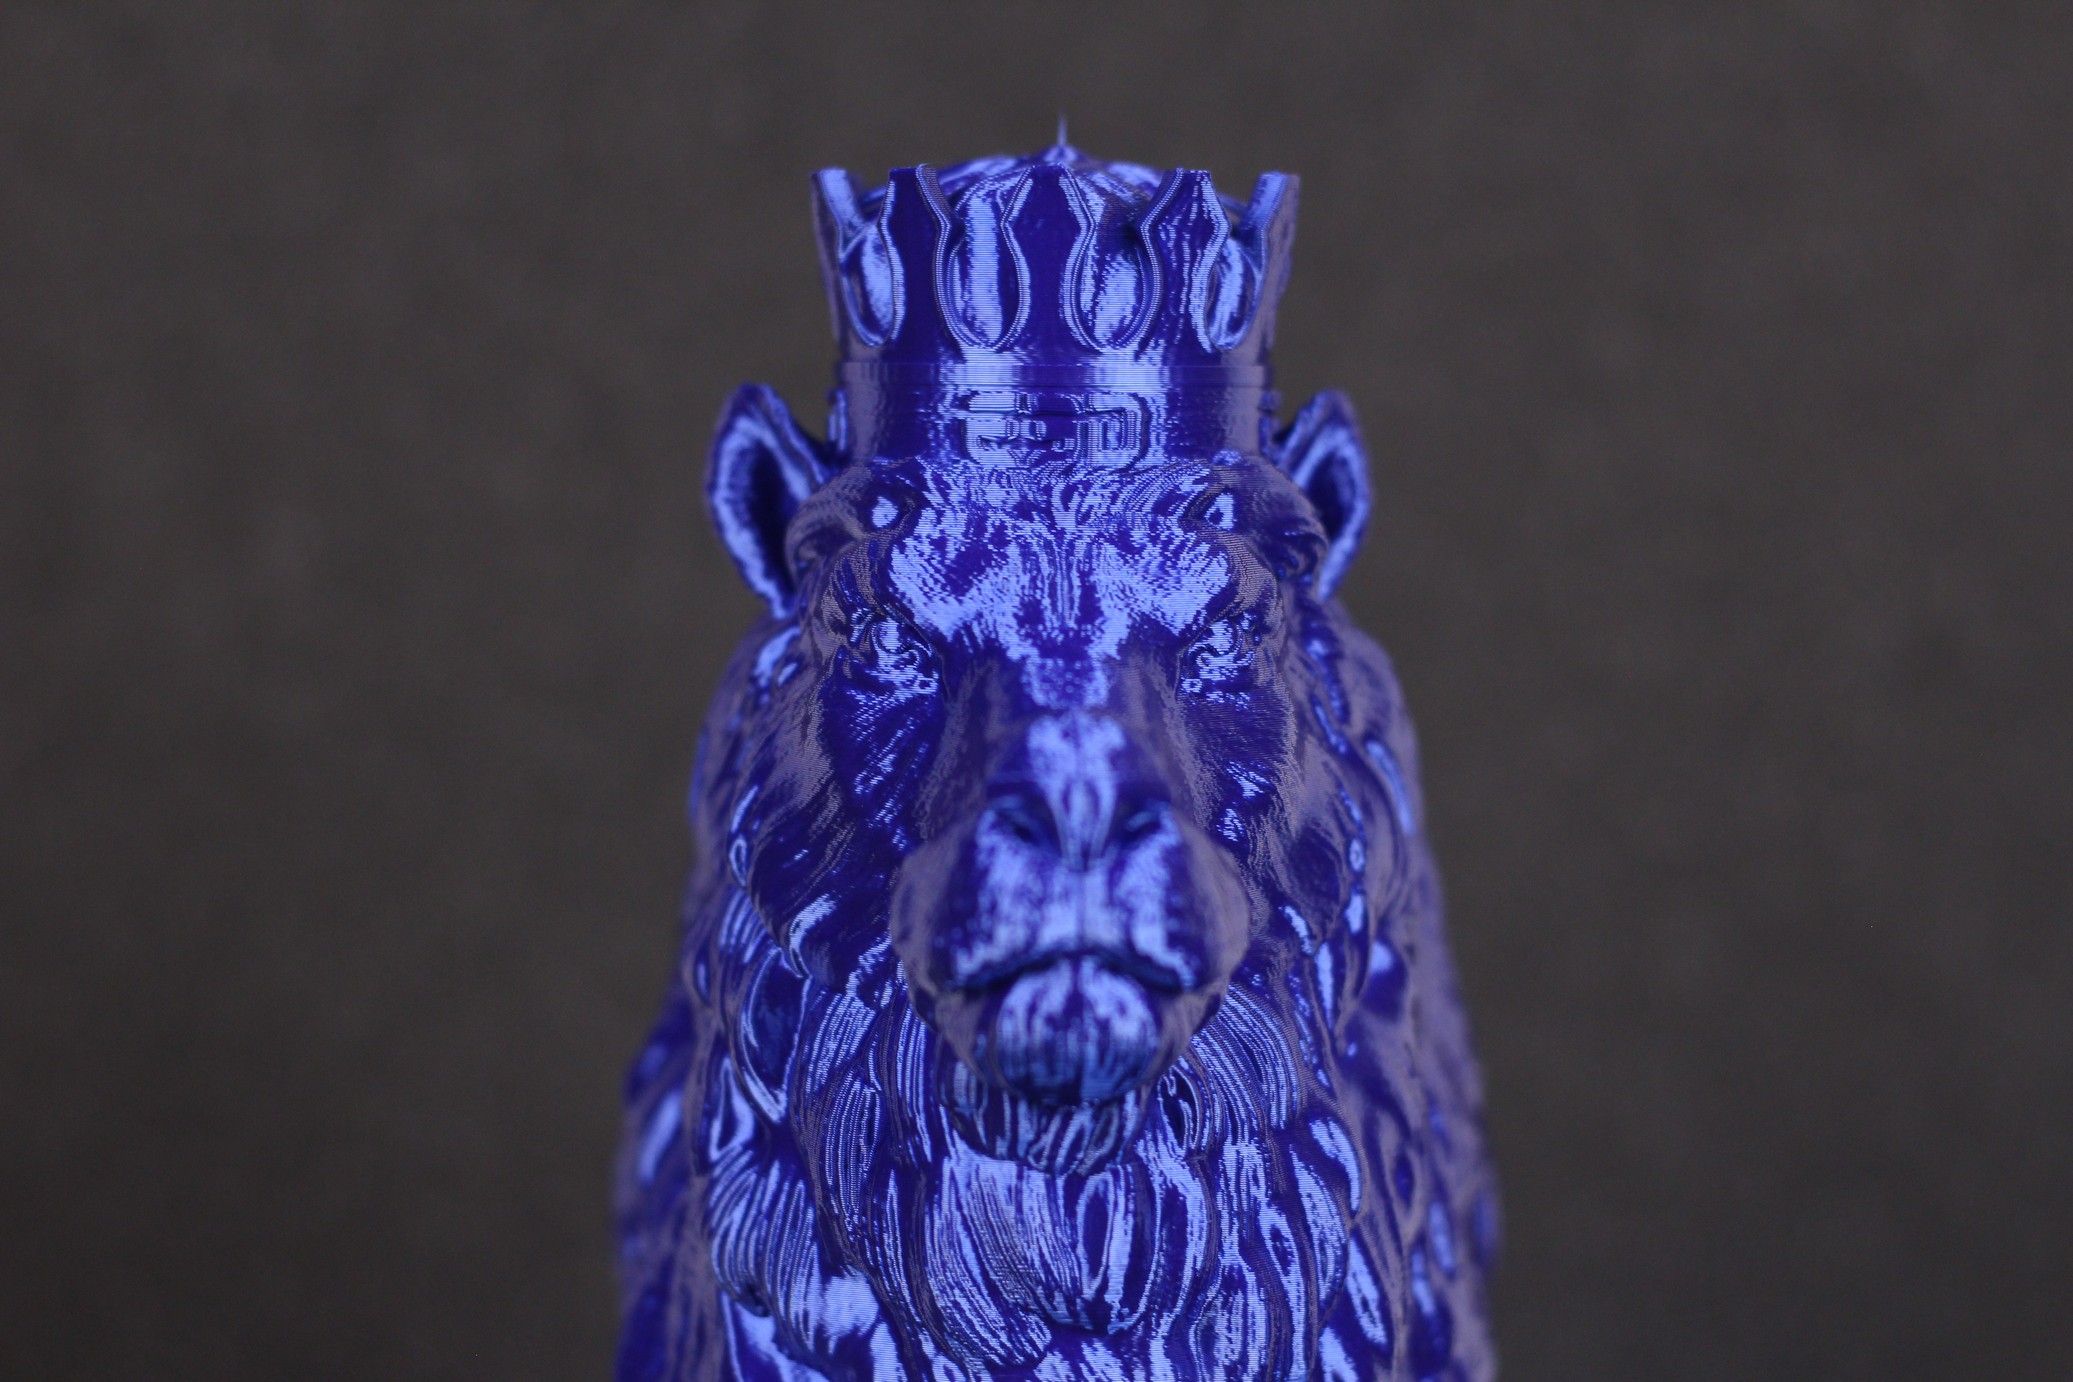 King Roary printed on Ender 3 S1 6 | Creality Ender 3 S1 Review: Almost Perfect